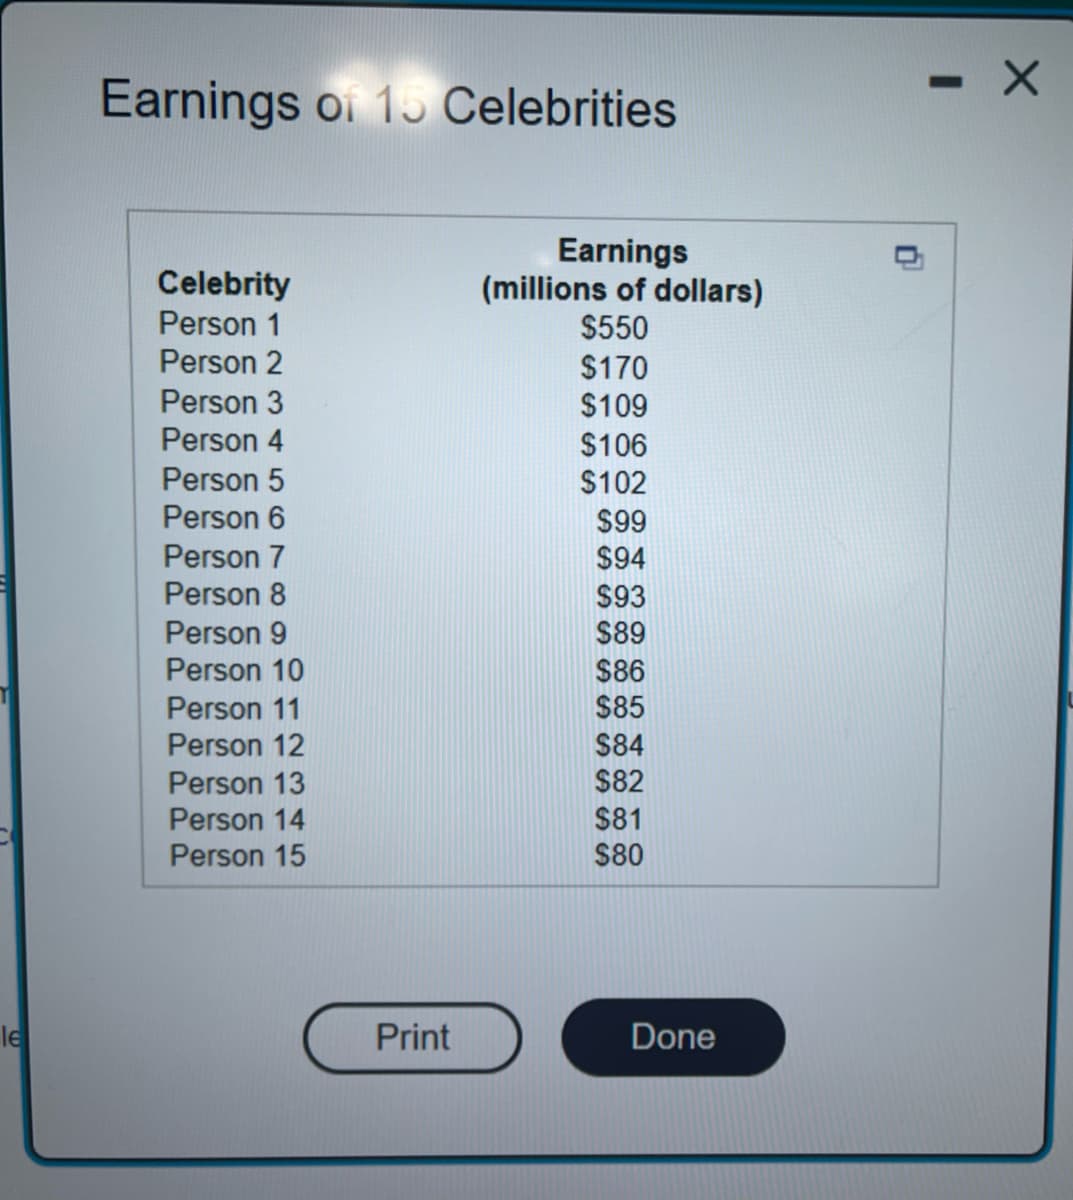 le
Earnings of 15 Celebrities
Celebrity
Person 1
Person 2
Person 3
Person 4
Person 5
Person 6
Person 7
Person 8
Person 9
Person 10
Person 11
Person 12
Person 13
Person 14
Person 15
Print
Earnings
(millions of dollars)
$550
$170
$109
$106
$102
$99
$94
$93
$89
$86
$85
$84
$82
$81
$80
Done
- X